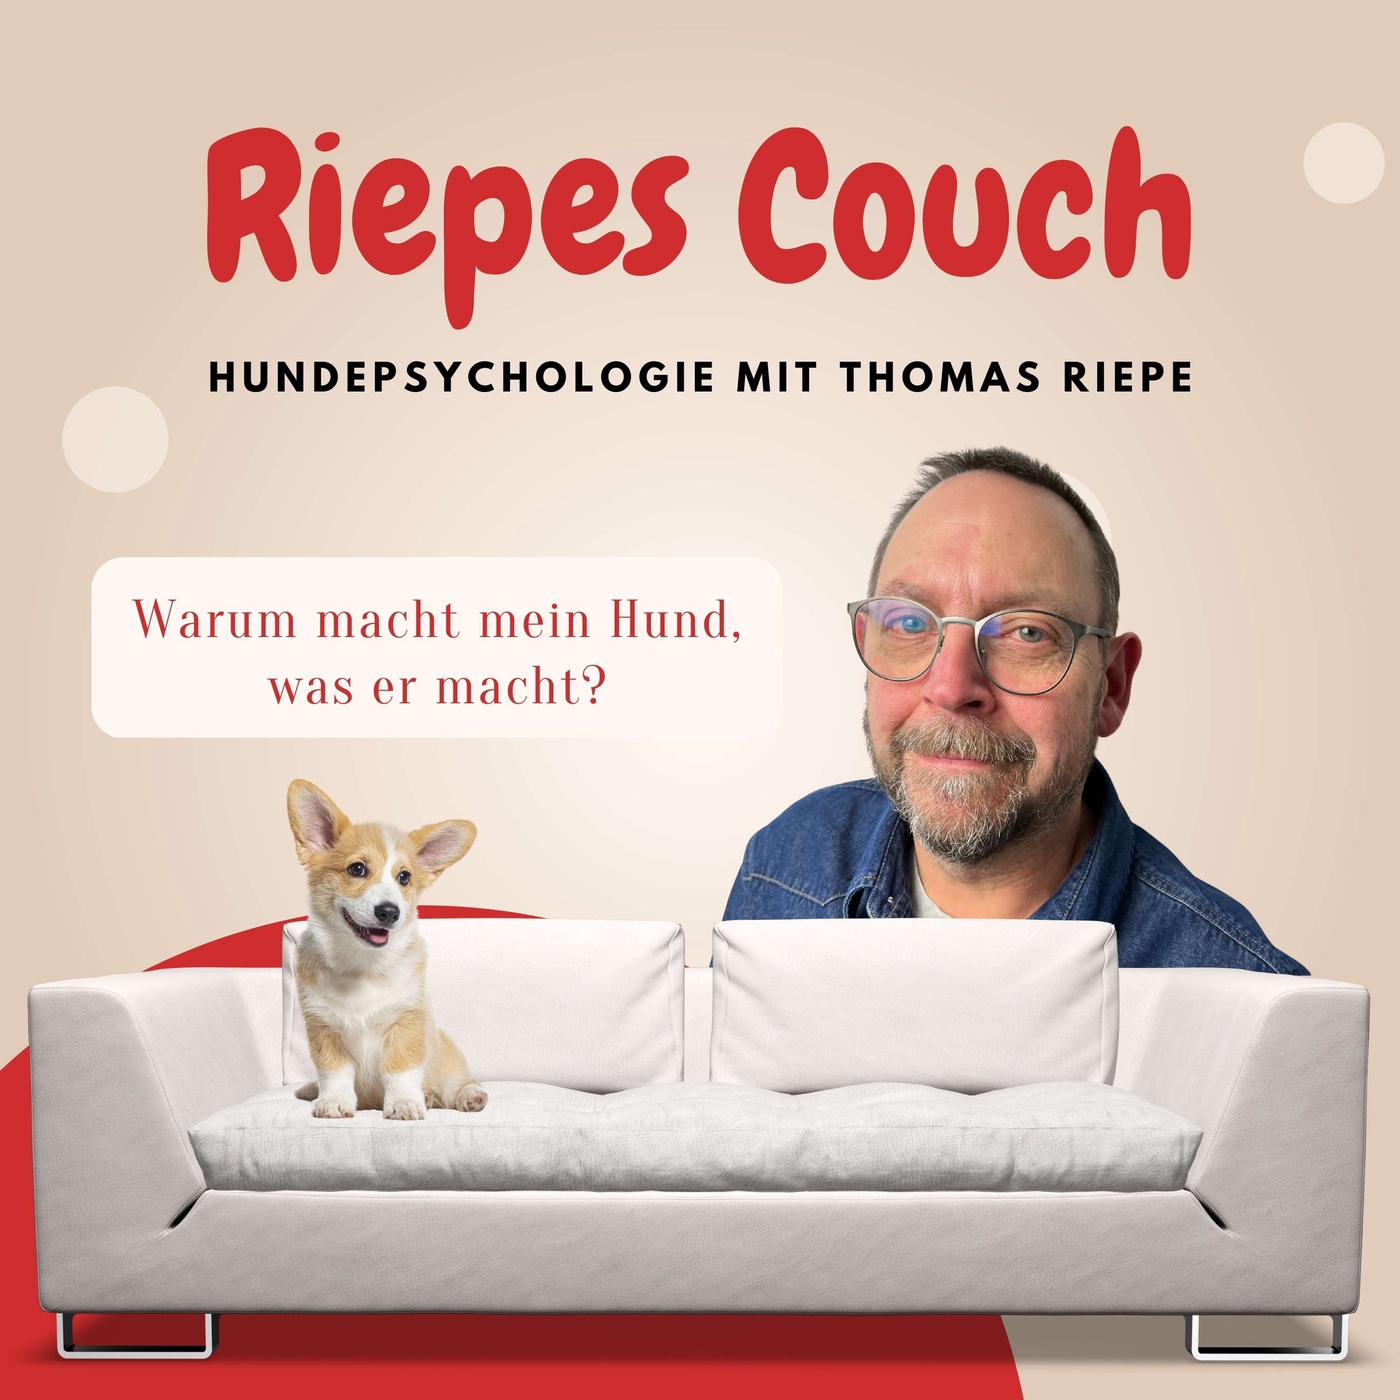 Riepes Couch - Hundepsychologie mit Thomas Riepe